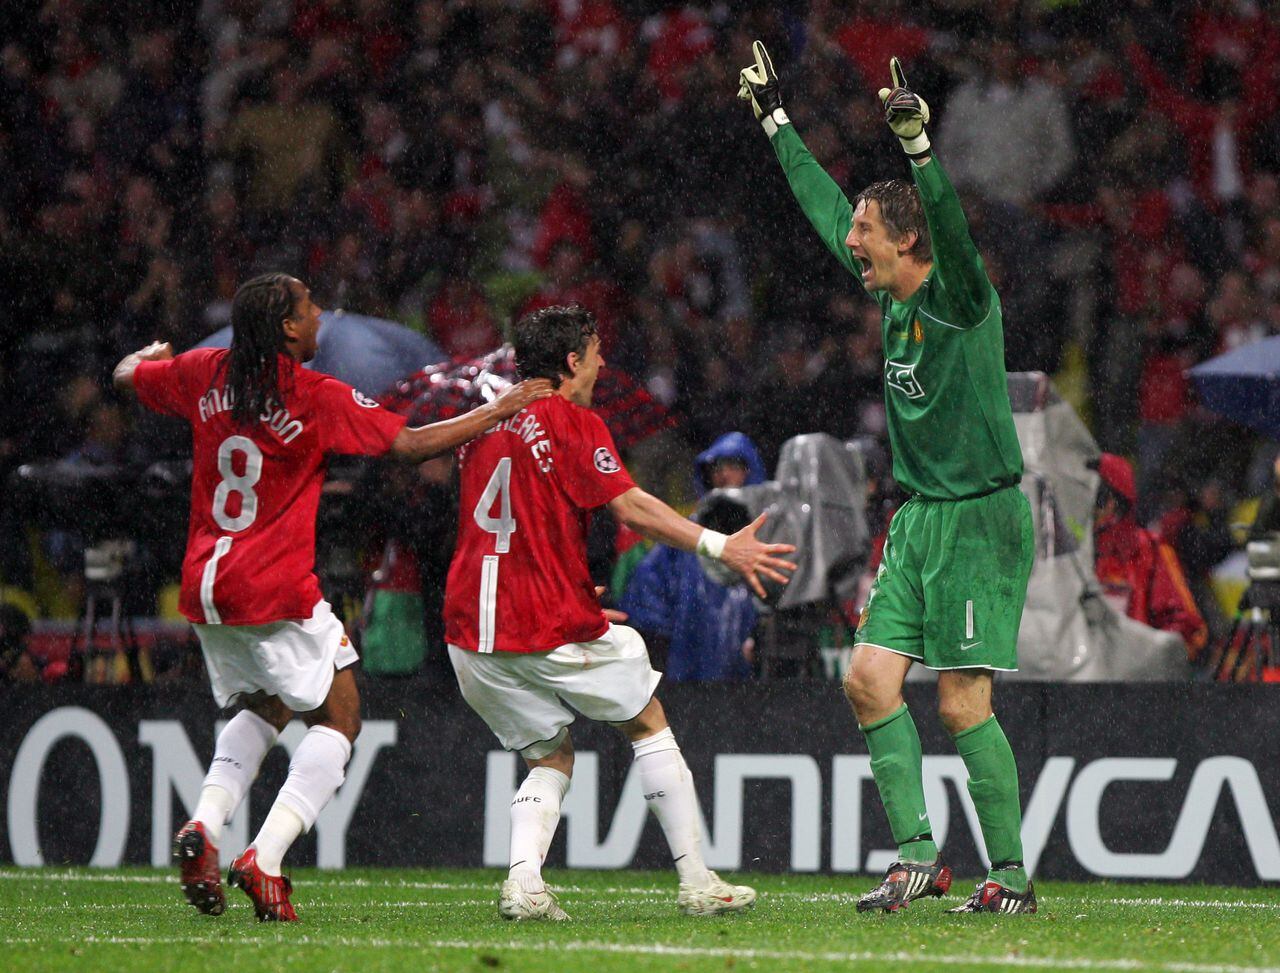 Andersen and Owen Hargreaves of Manchester United run up to celebrate with the jubulant Edwin Van Der Sar of Manchester United after he saved a penalty leading to Manchester Untied winning the Champions League final (Photo by AMA/Corbis via Getty Images)